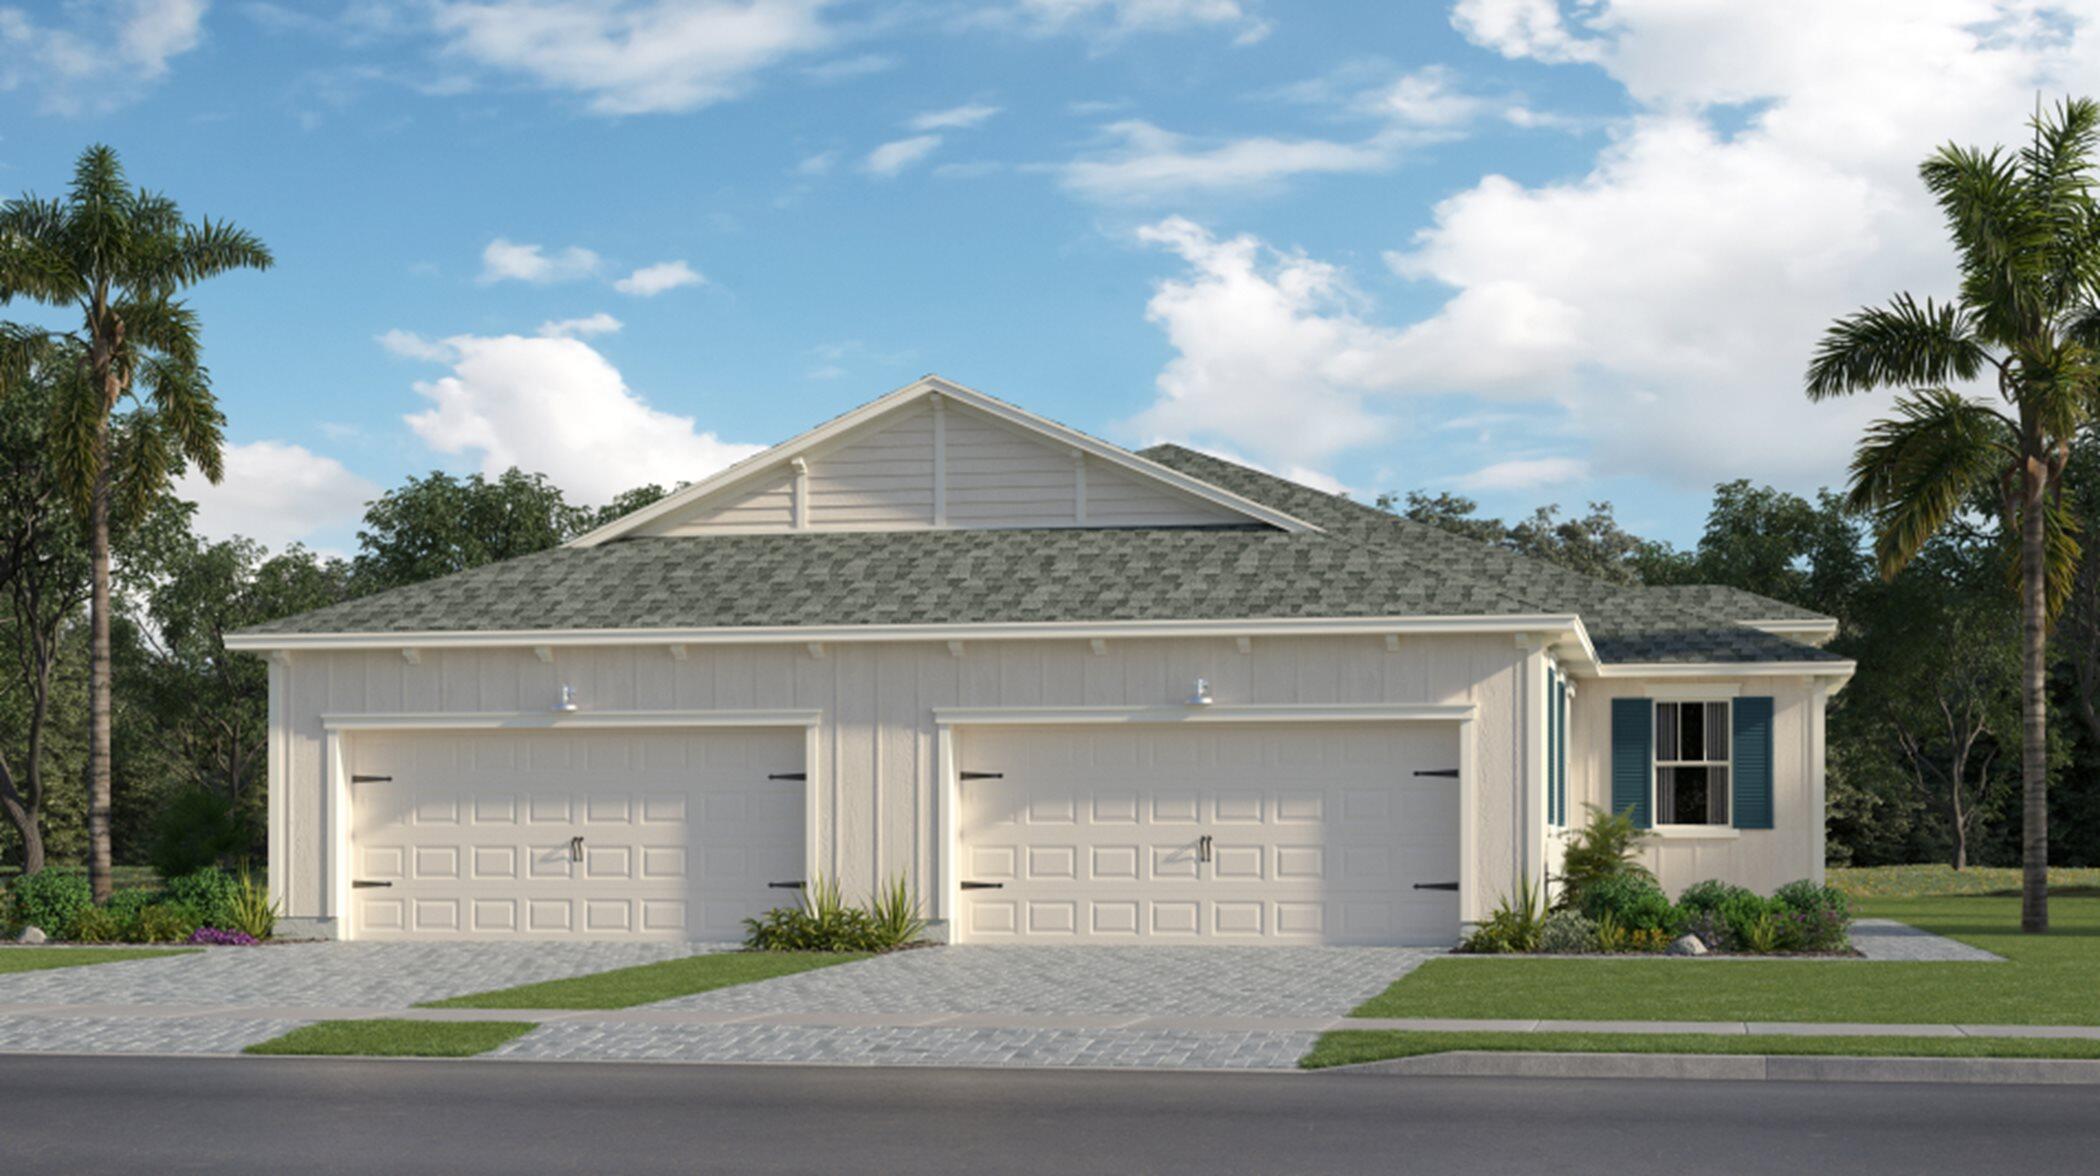 1355 Tangled Orch Trace, Loxahatchee, Palm Beach County, Florida - 2 Bedrooms  
2 Bathrooms - 